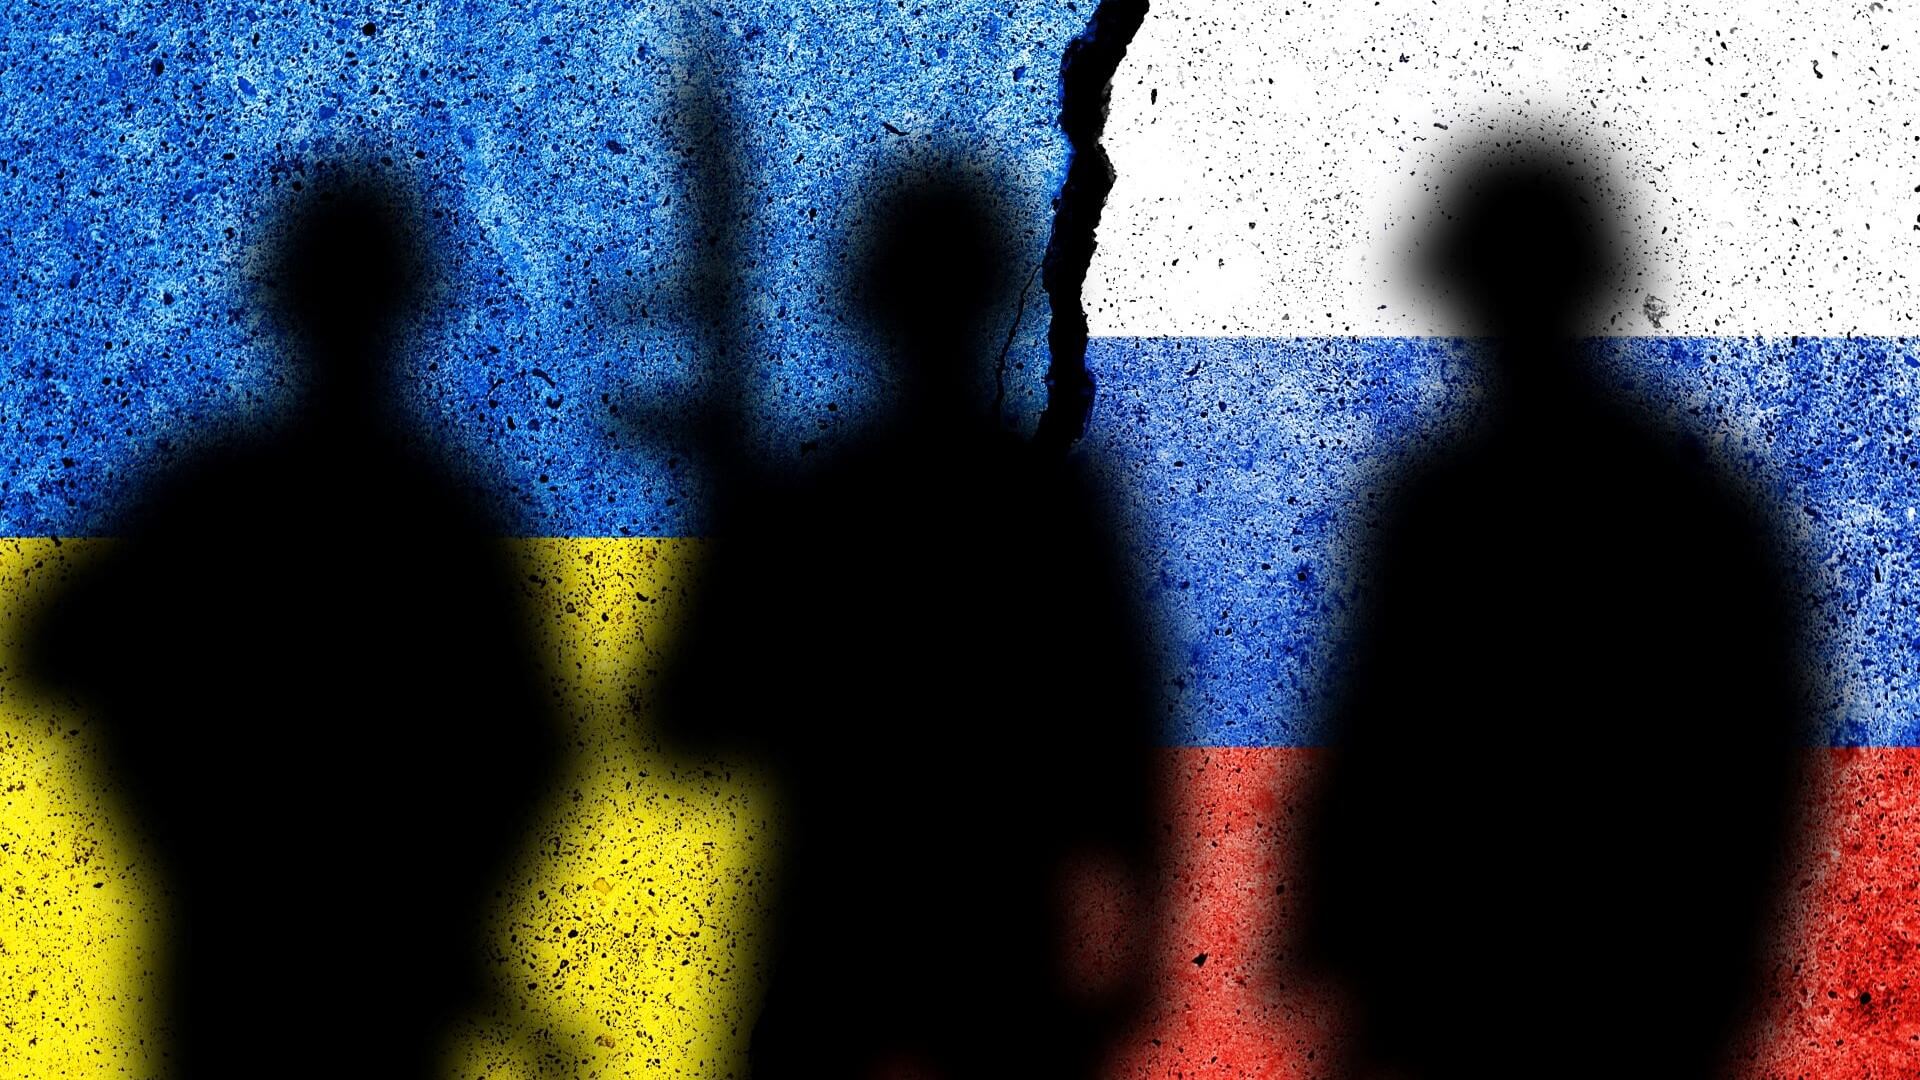 graphic representation of Ukraine flag to left and Russian flag to right, with three shadow outlines of soldiers overlaid on top